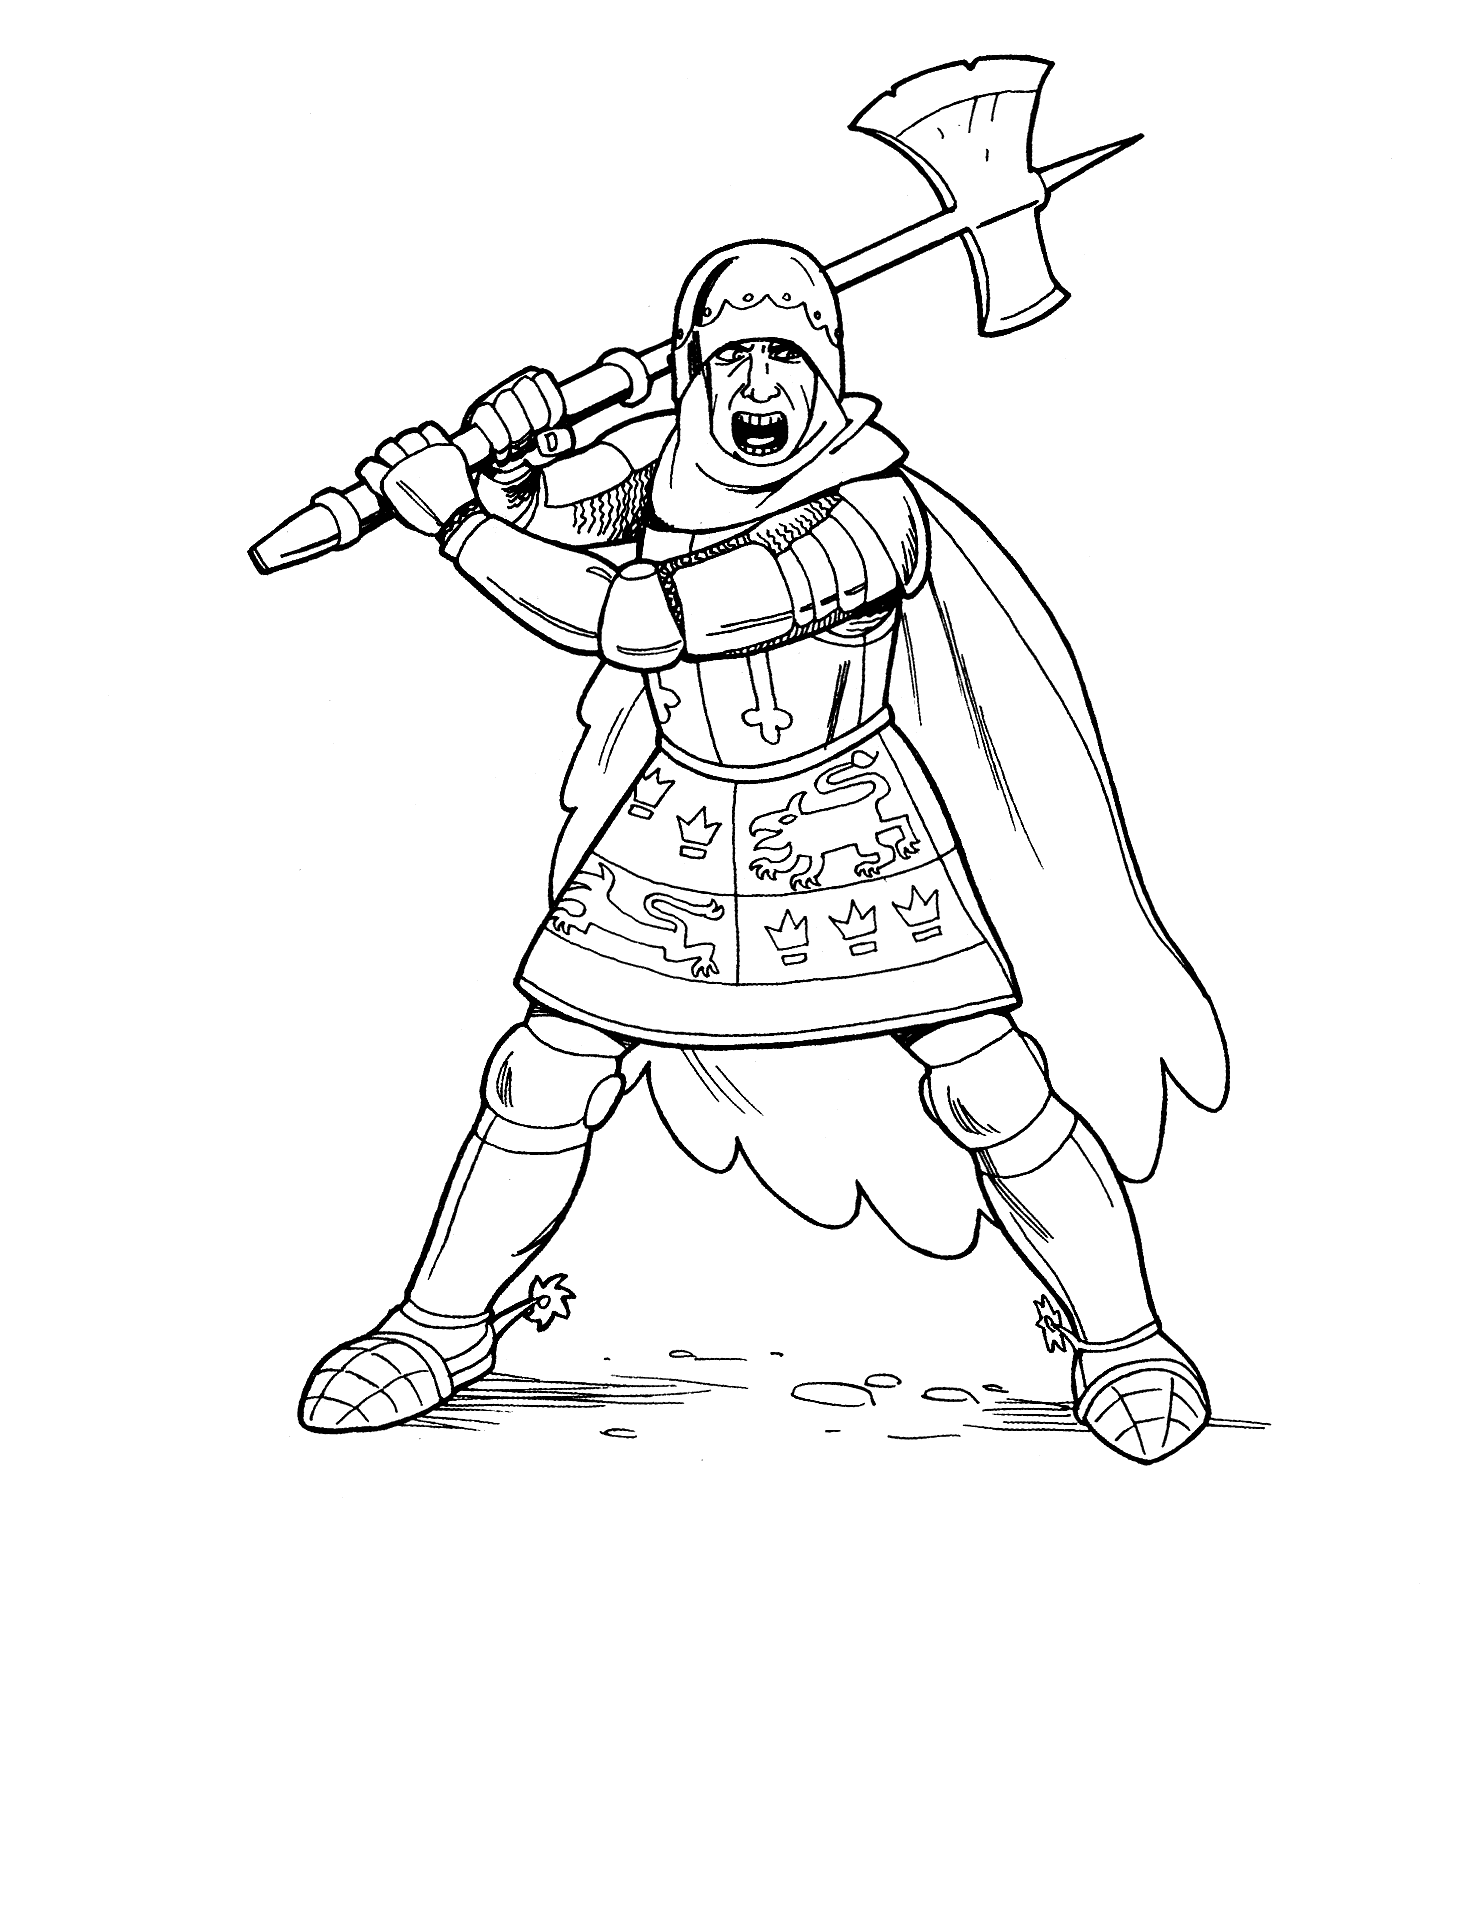 Coloring page - Knight with ax